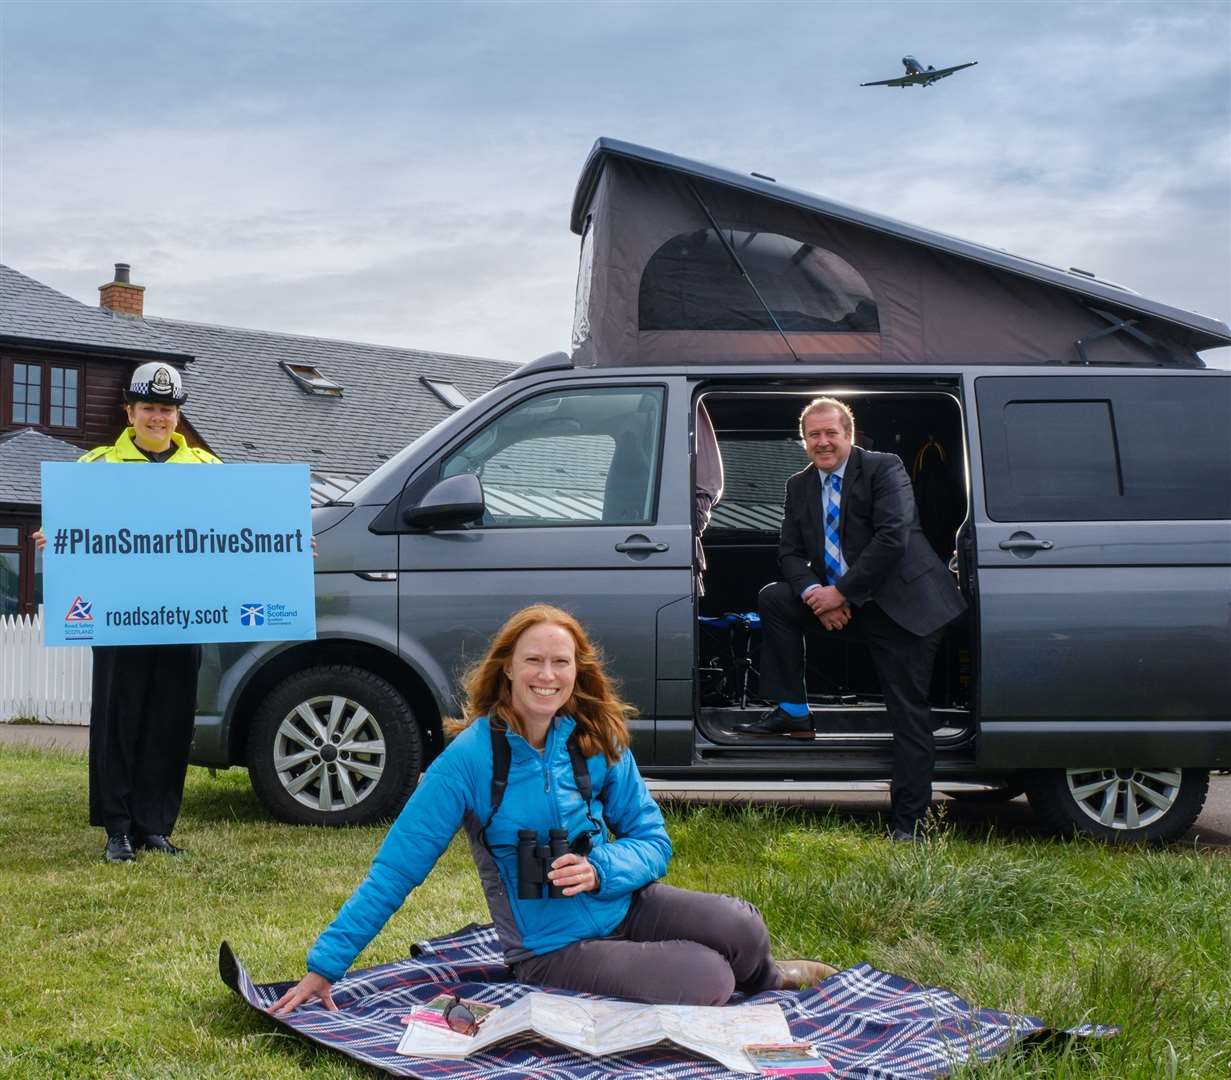 (From left) Chief Superintendent Louise Blakelock, Police Scotland; Caroline Warburton, Regional Leadership Director, VisitScotland; and Minister for Transport, Graeme Dey launch the new staycation campaign by the Scottish Government and Road Safety Scotland.